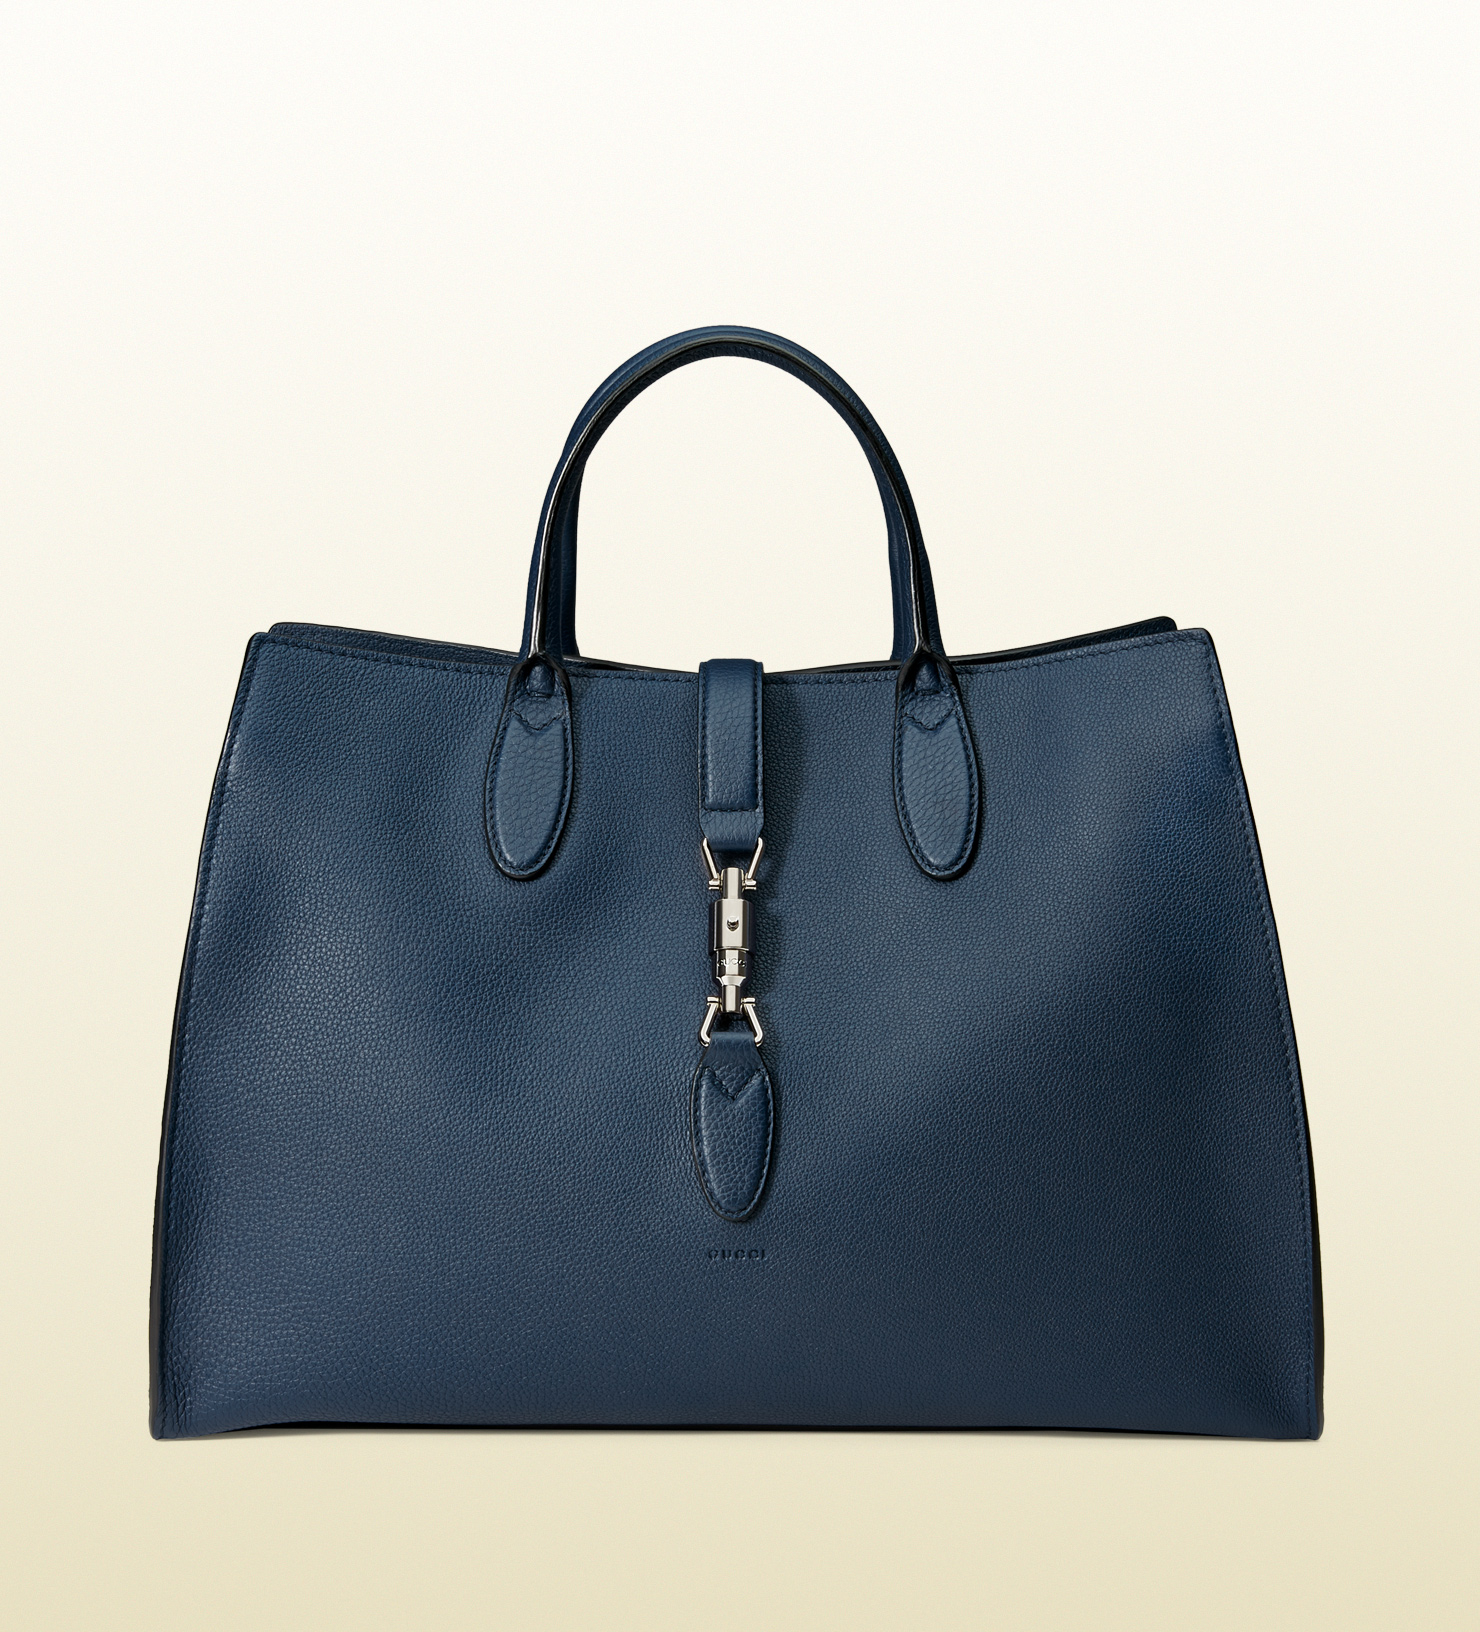 Lyst - Gucci Jackie Soft Leather Top Handle Bag in Blue